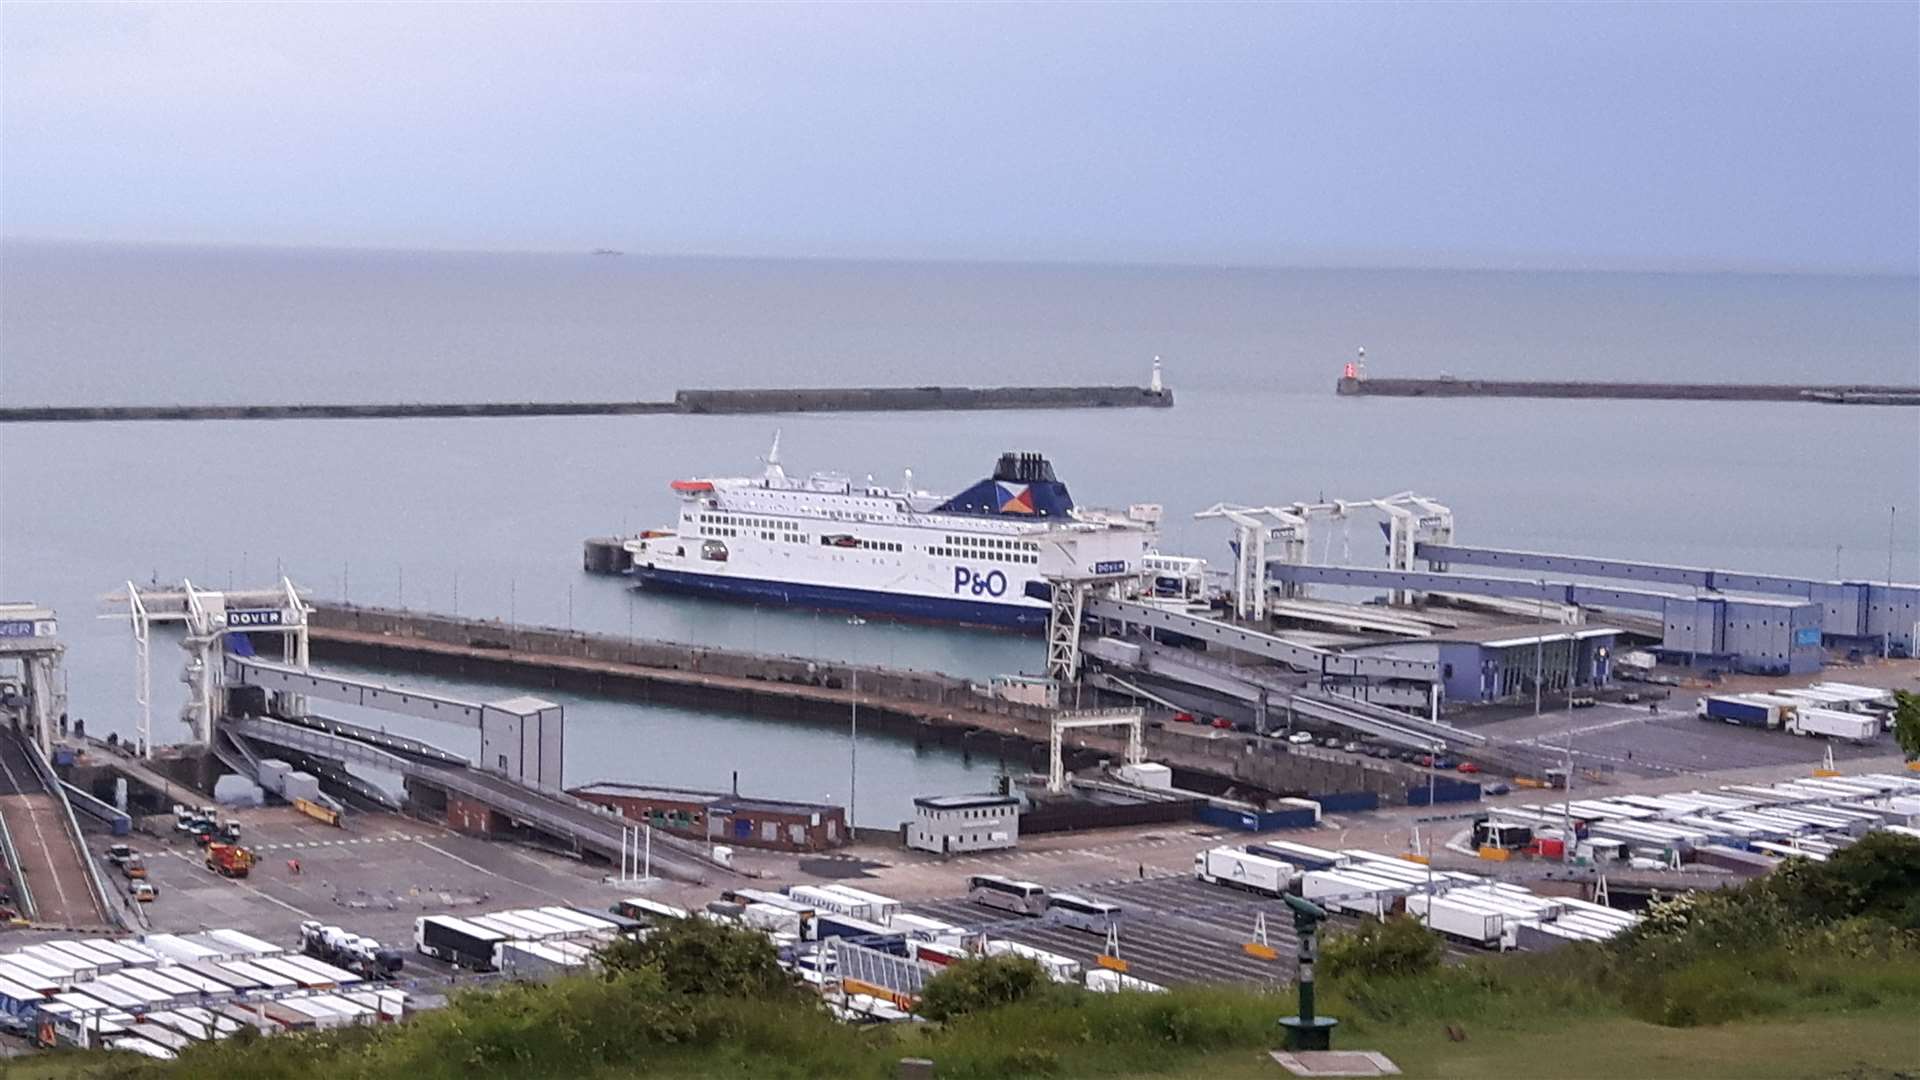 A P&O ferry in berth at the Port of Dover